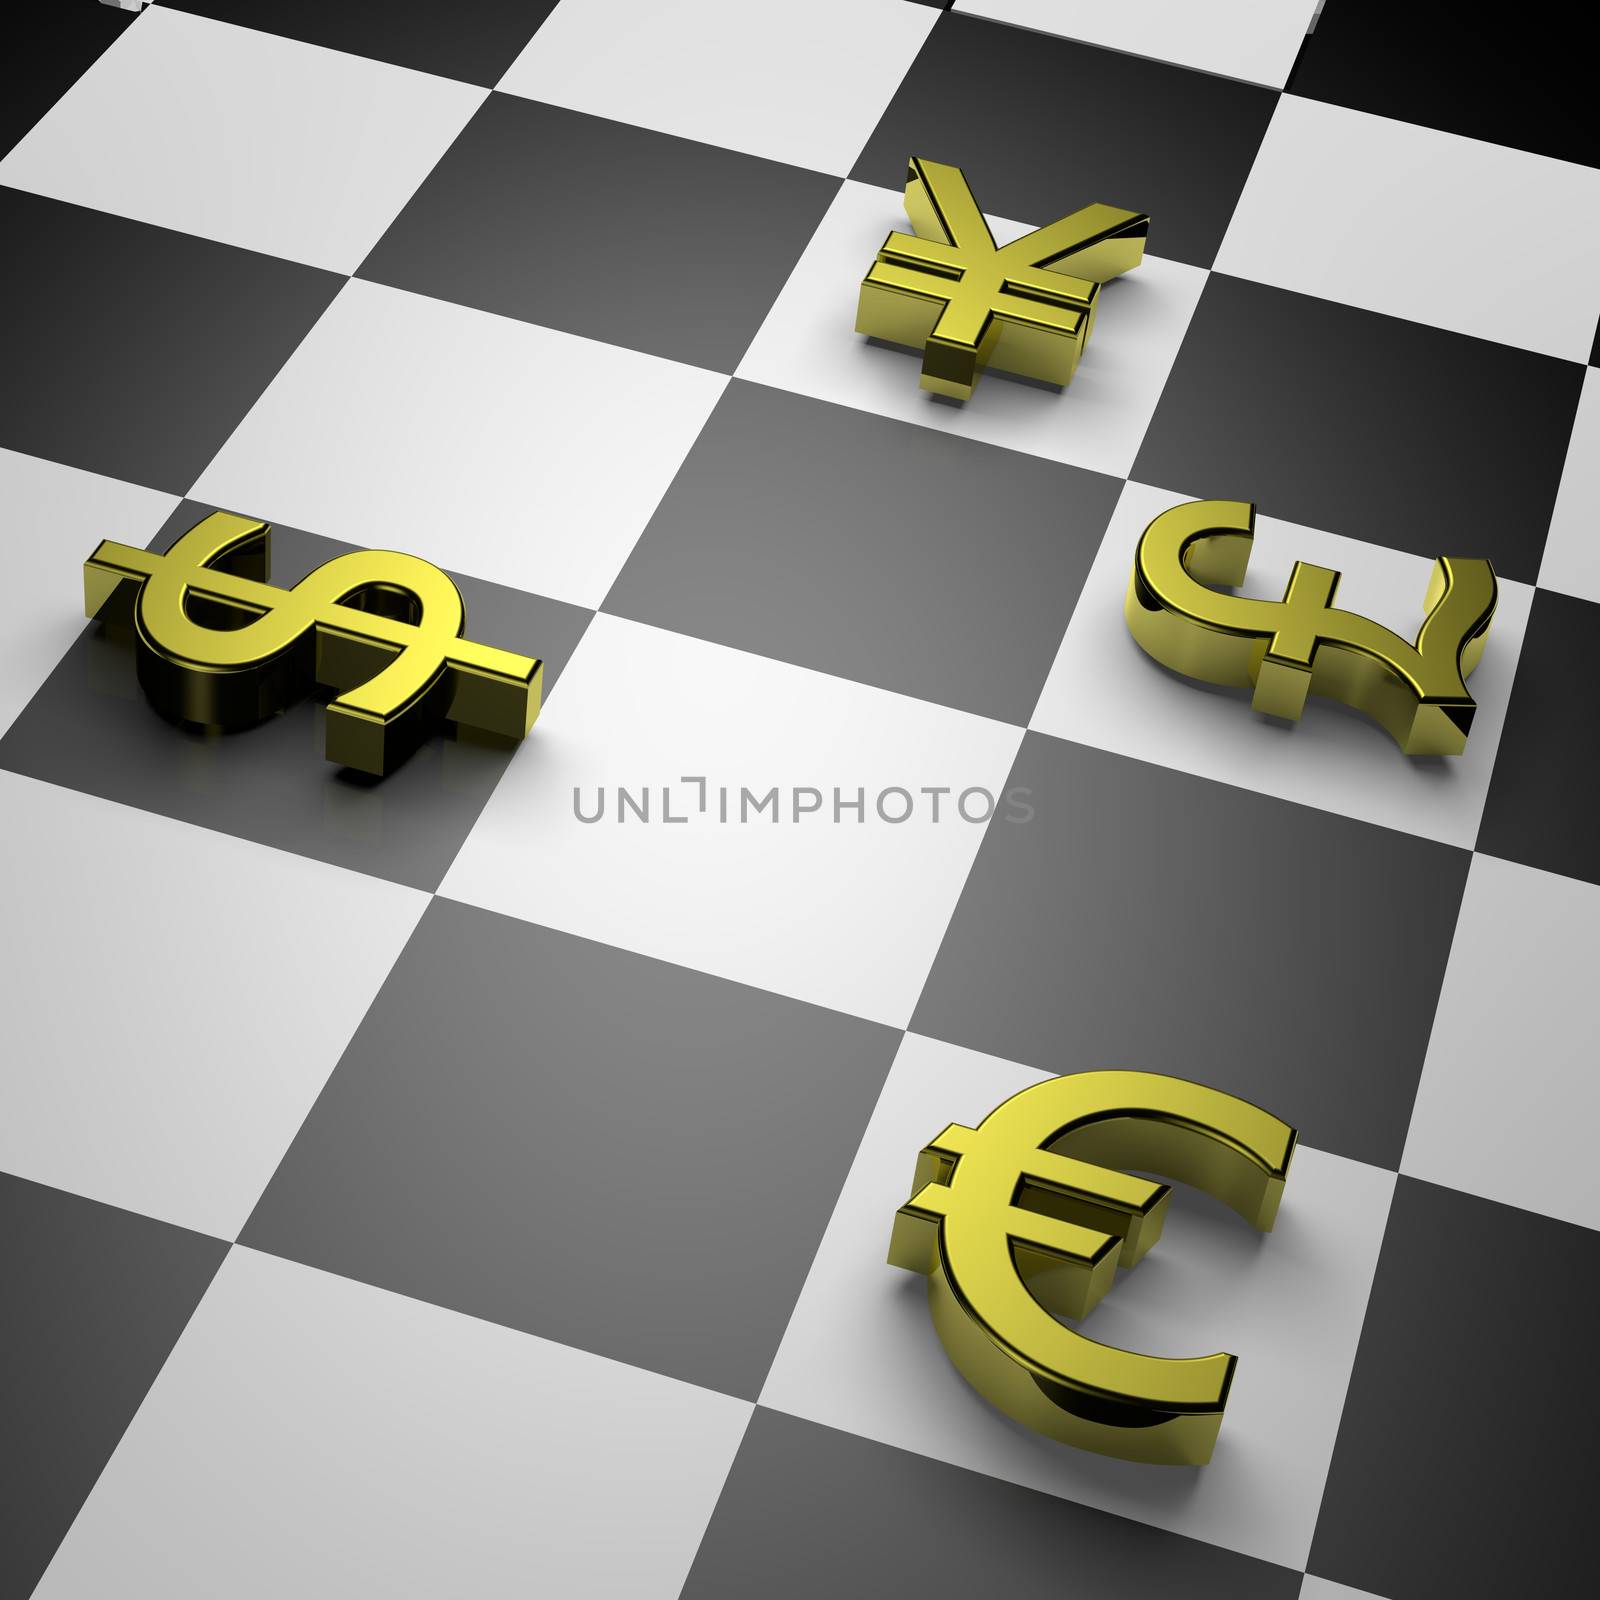 3D golden currency symbols on chessboard